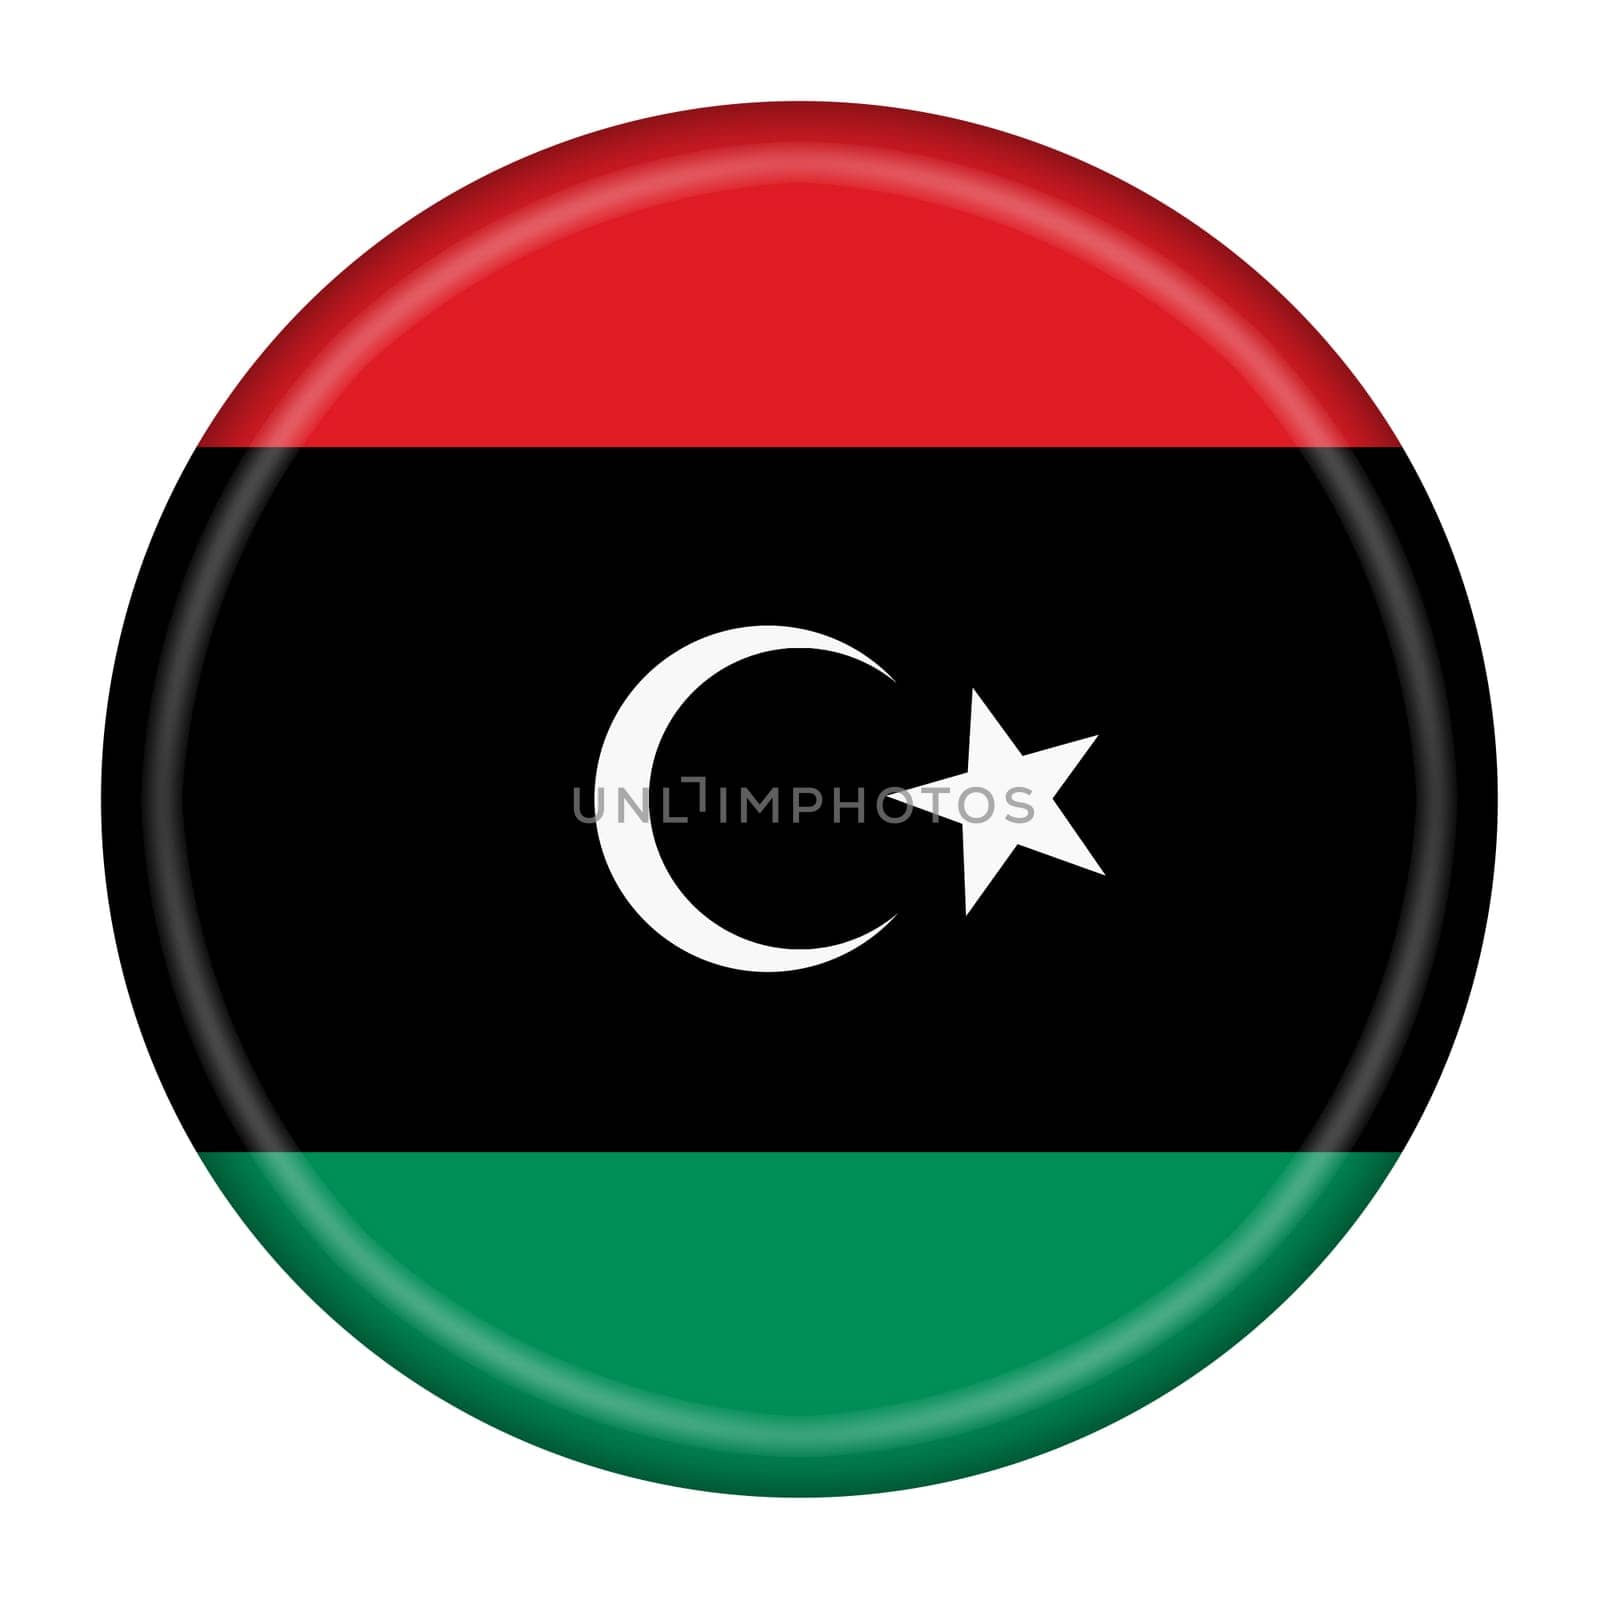 Libya flag button 3d illustration with clipping path by VivacityImages